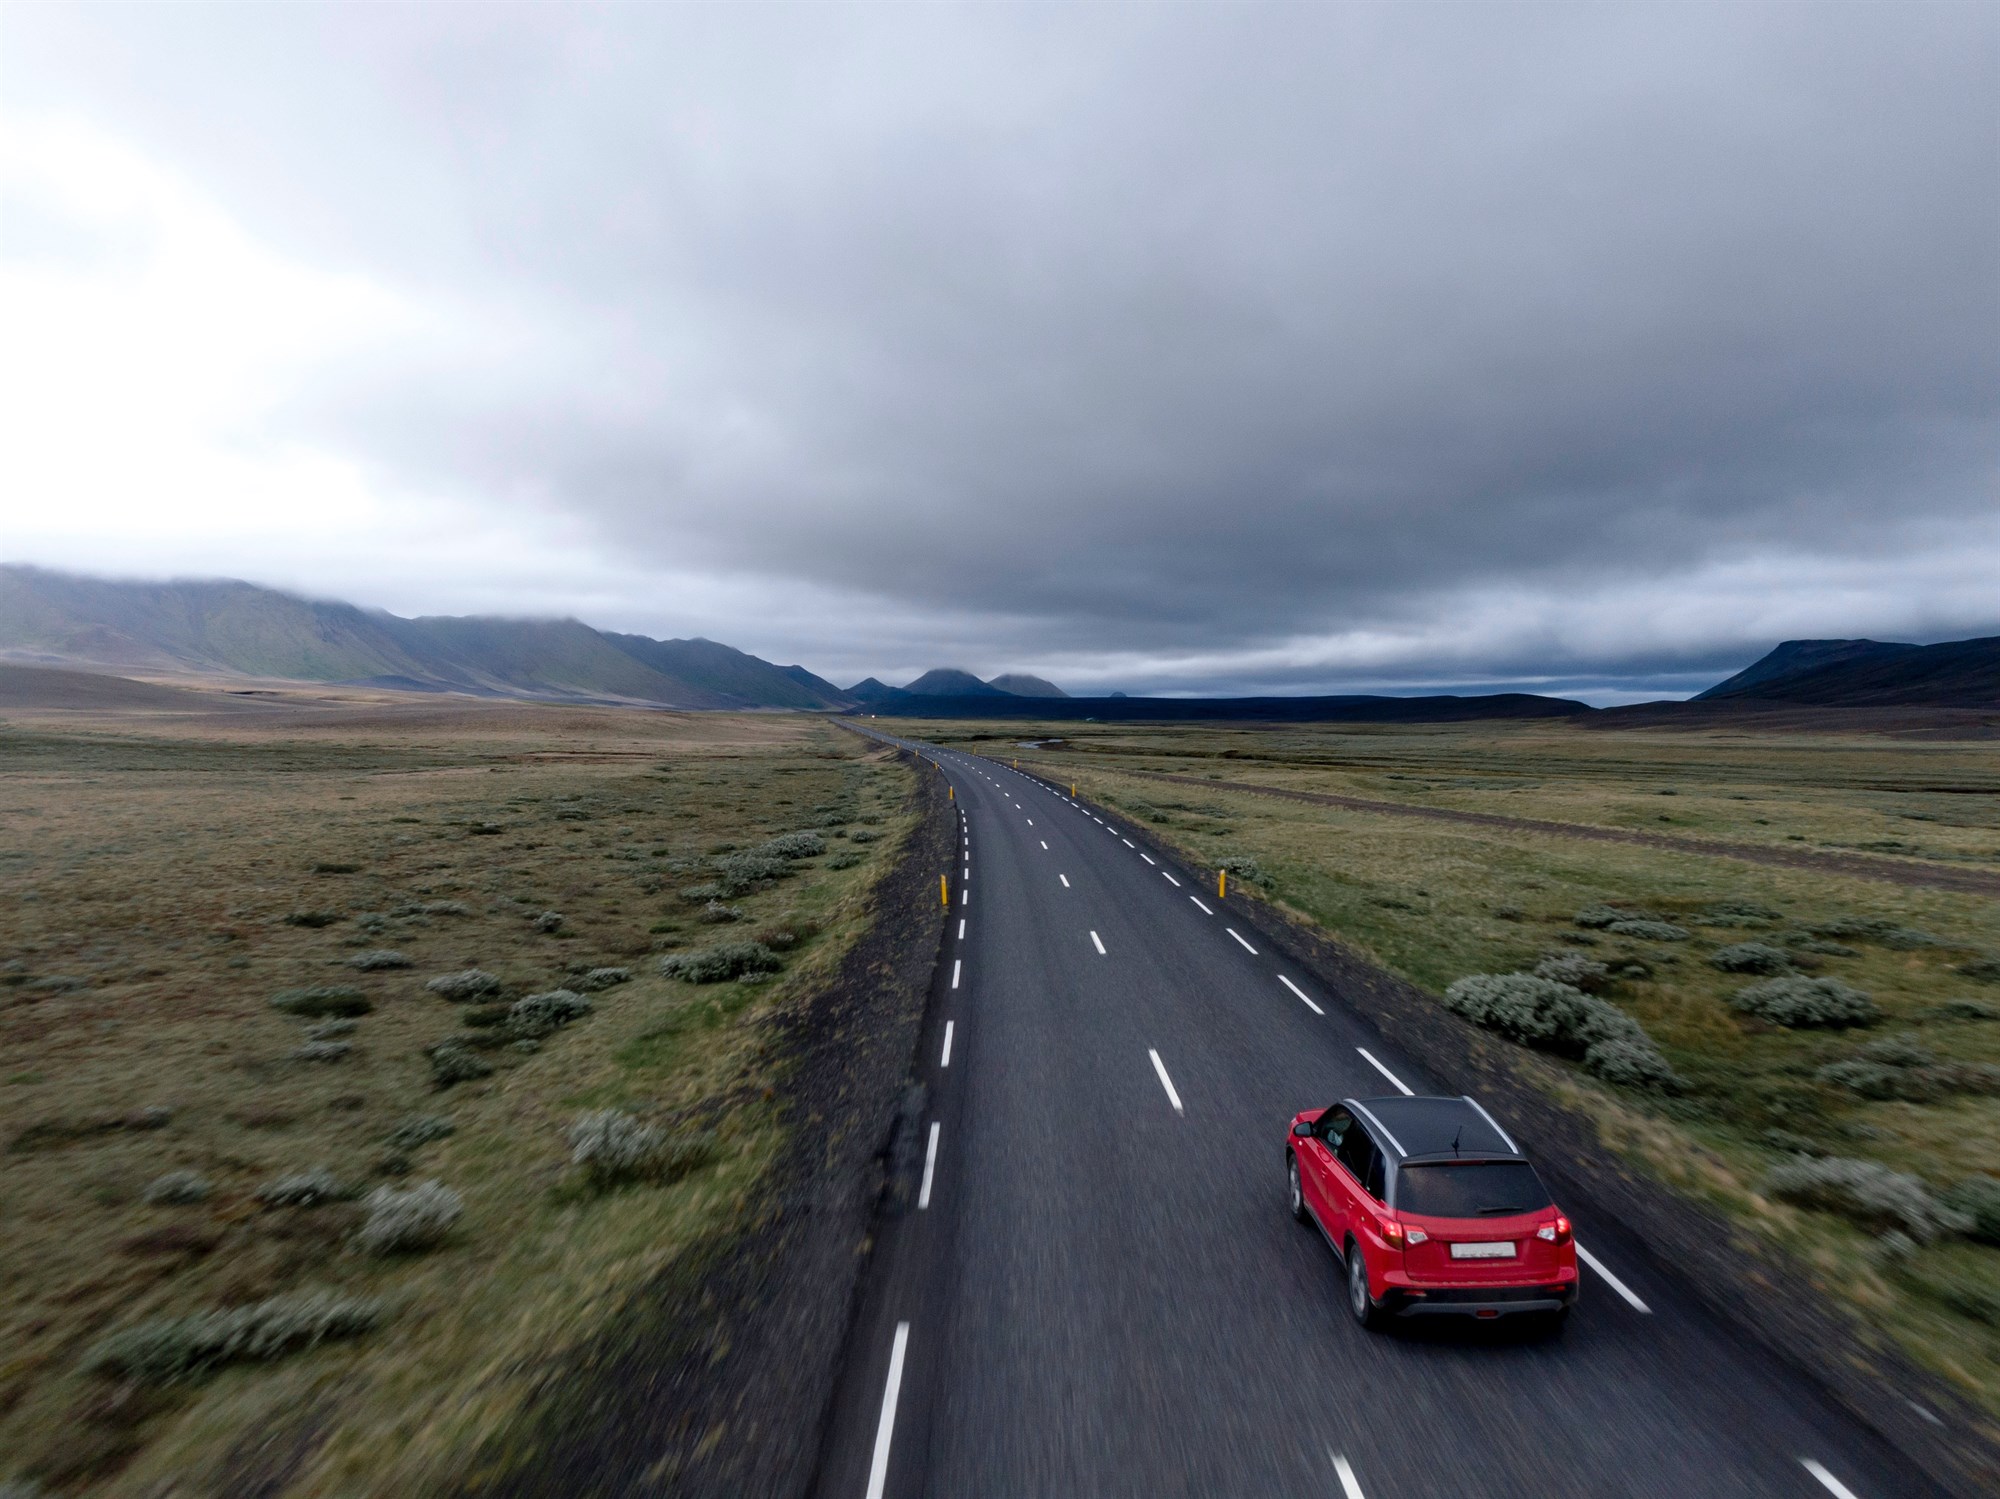  Red car driving on Icelandic road surrounded by flat landscape.